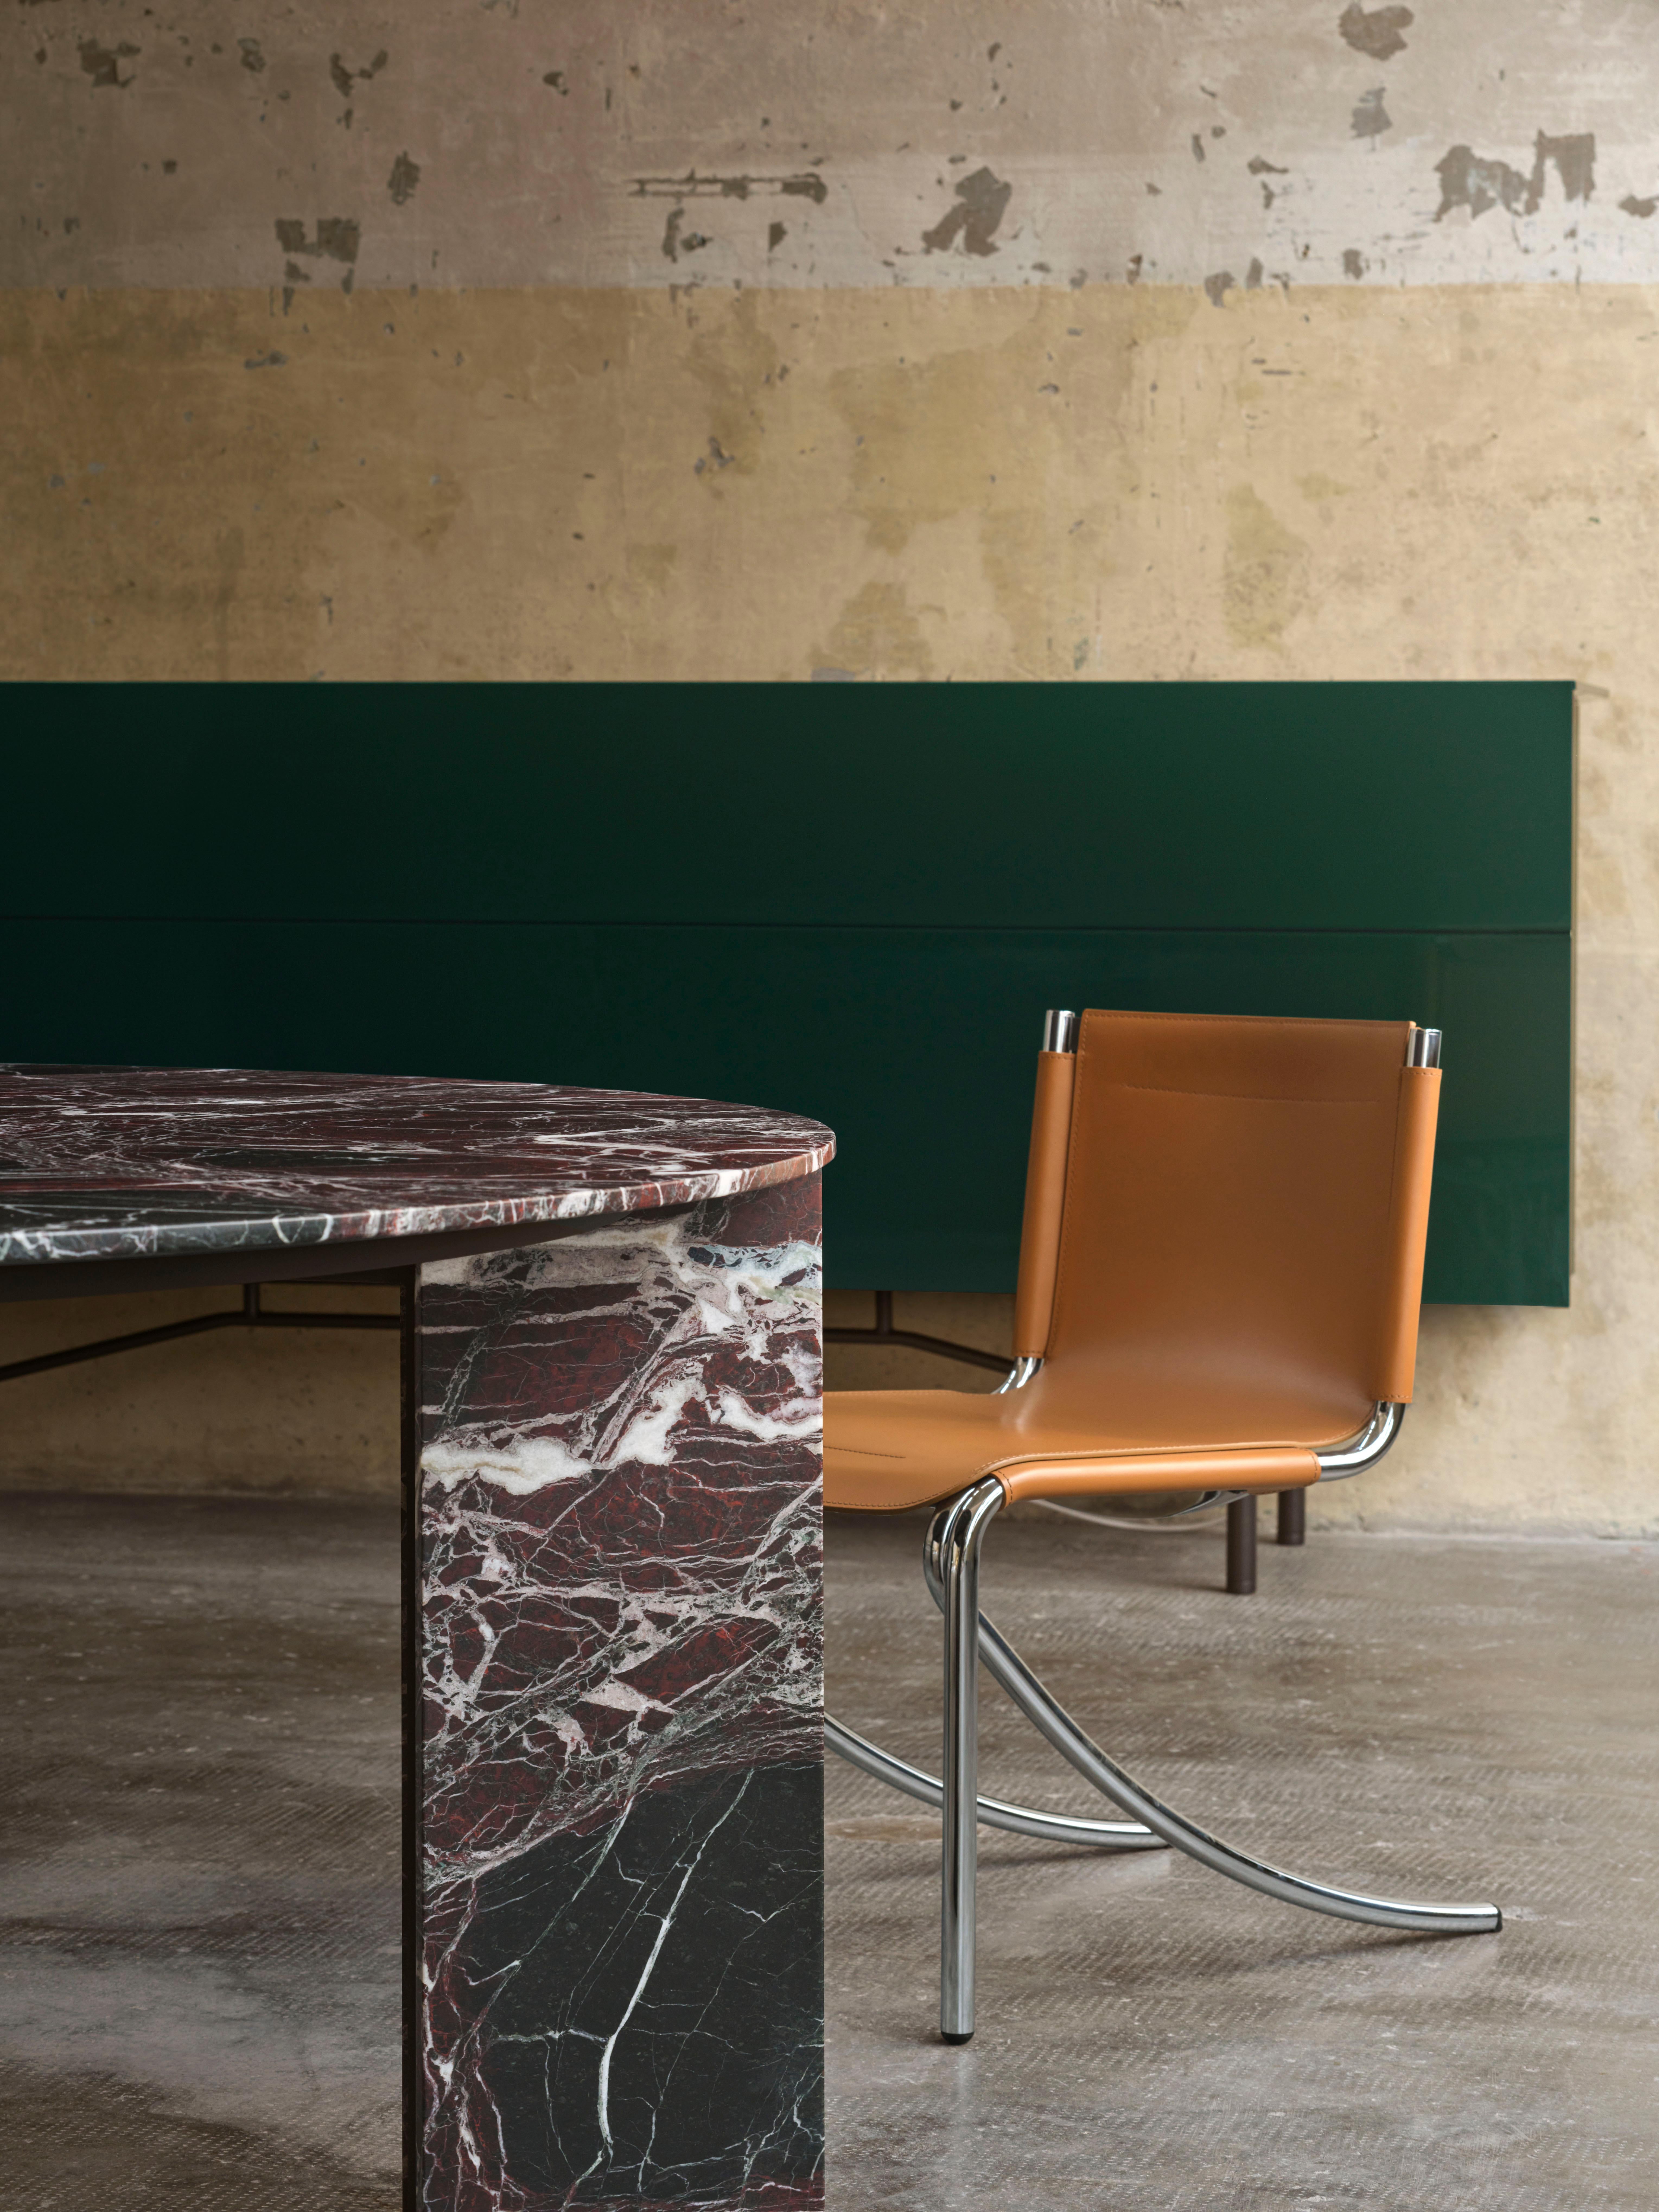 Large table, made of stone and metal. Top of stone thick cm 2 with tapered edges, divided into sections, supported by a wooden panel. Particularly shaped legs with a ''V'' section made of an innovative and contrasting material combination of stone